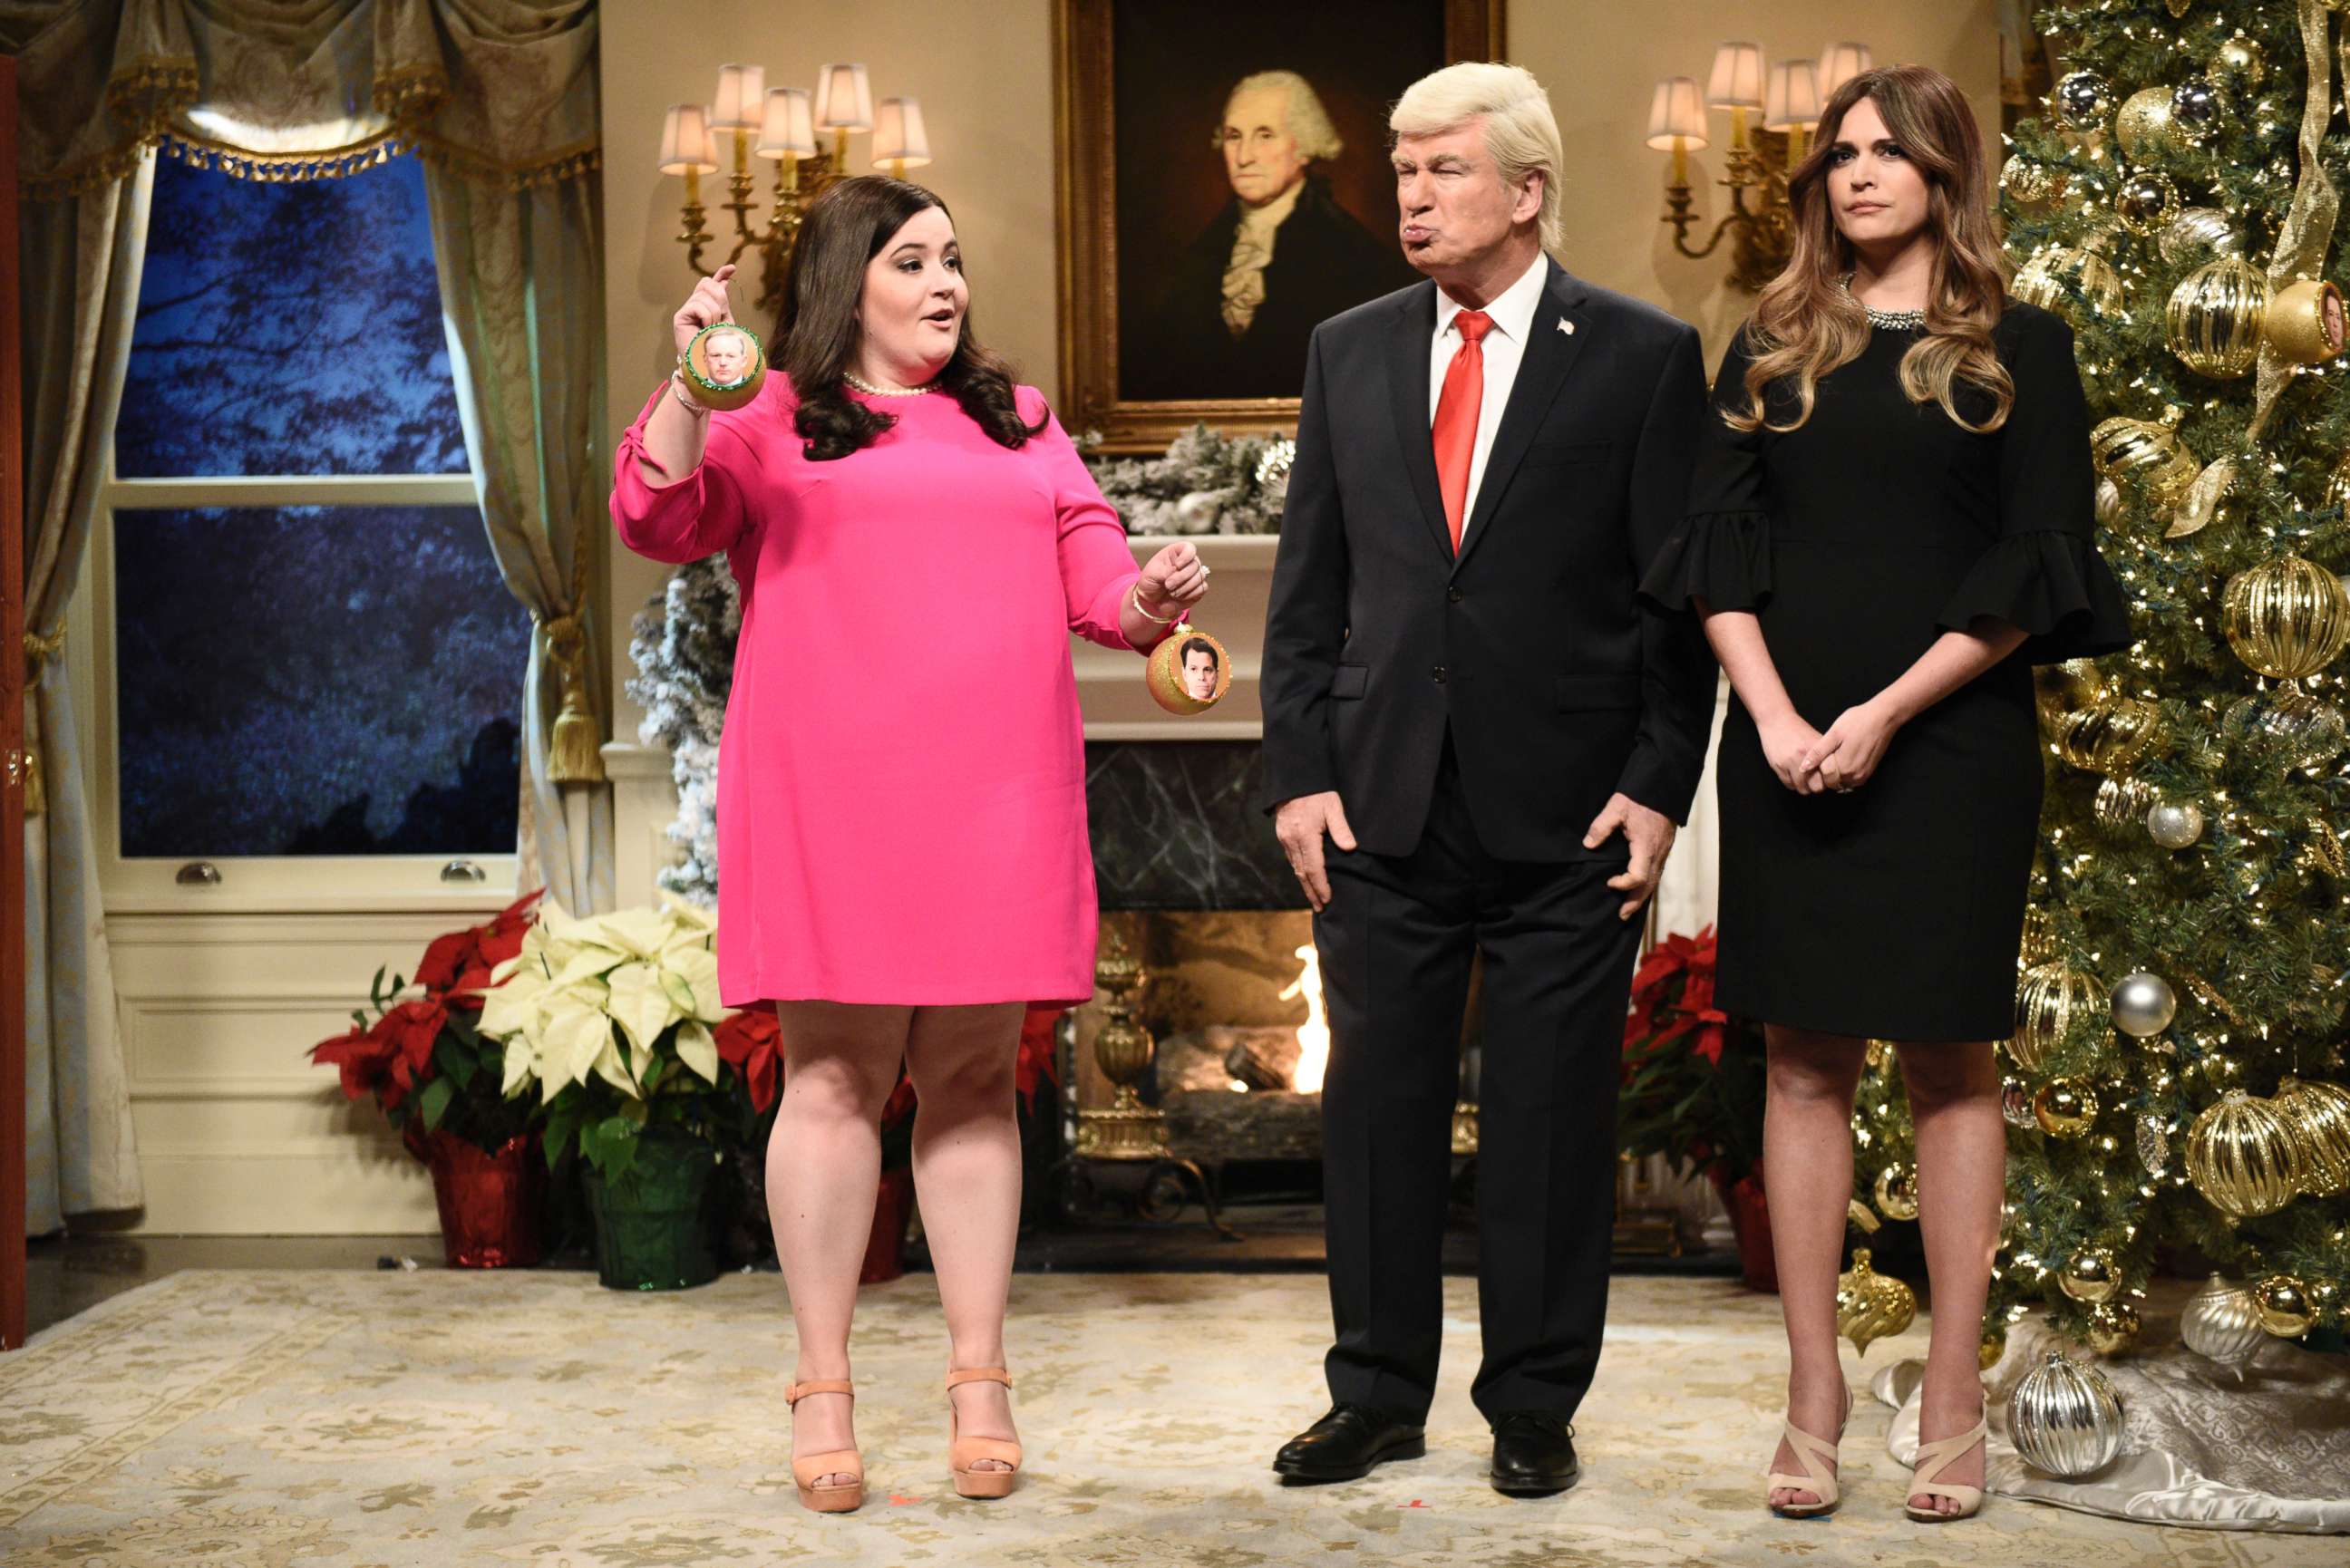 PHOTO: SATURDAY NIGHT LIVE -- Episode 1734 -- Pictured: (l-r) Aidy Bryant as Sarah Huckabee Sanders, Alec Baldwin as President Donald Trump, Cecily Strong as Melania Trump during "White House Tree Trimming Cold Open" on December 16, 2017 